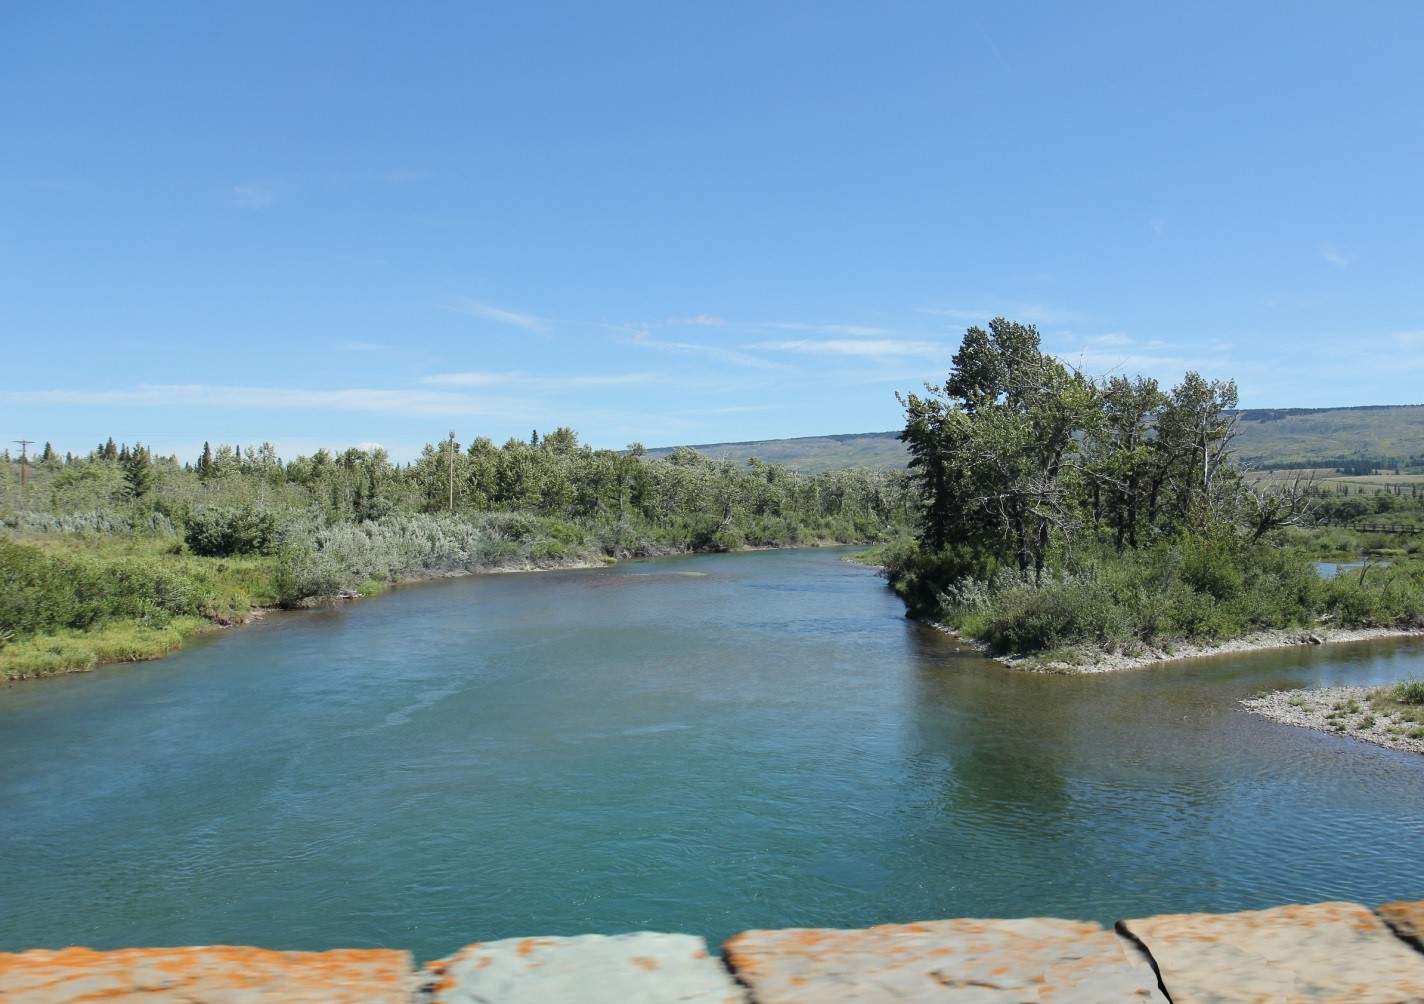 The St. Mary River, which flows between Montana and Alberta, could be facing more extreme weather patterns in the coming decades. Credit: Royalbroil